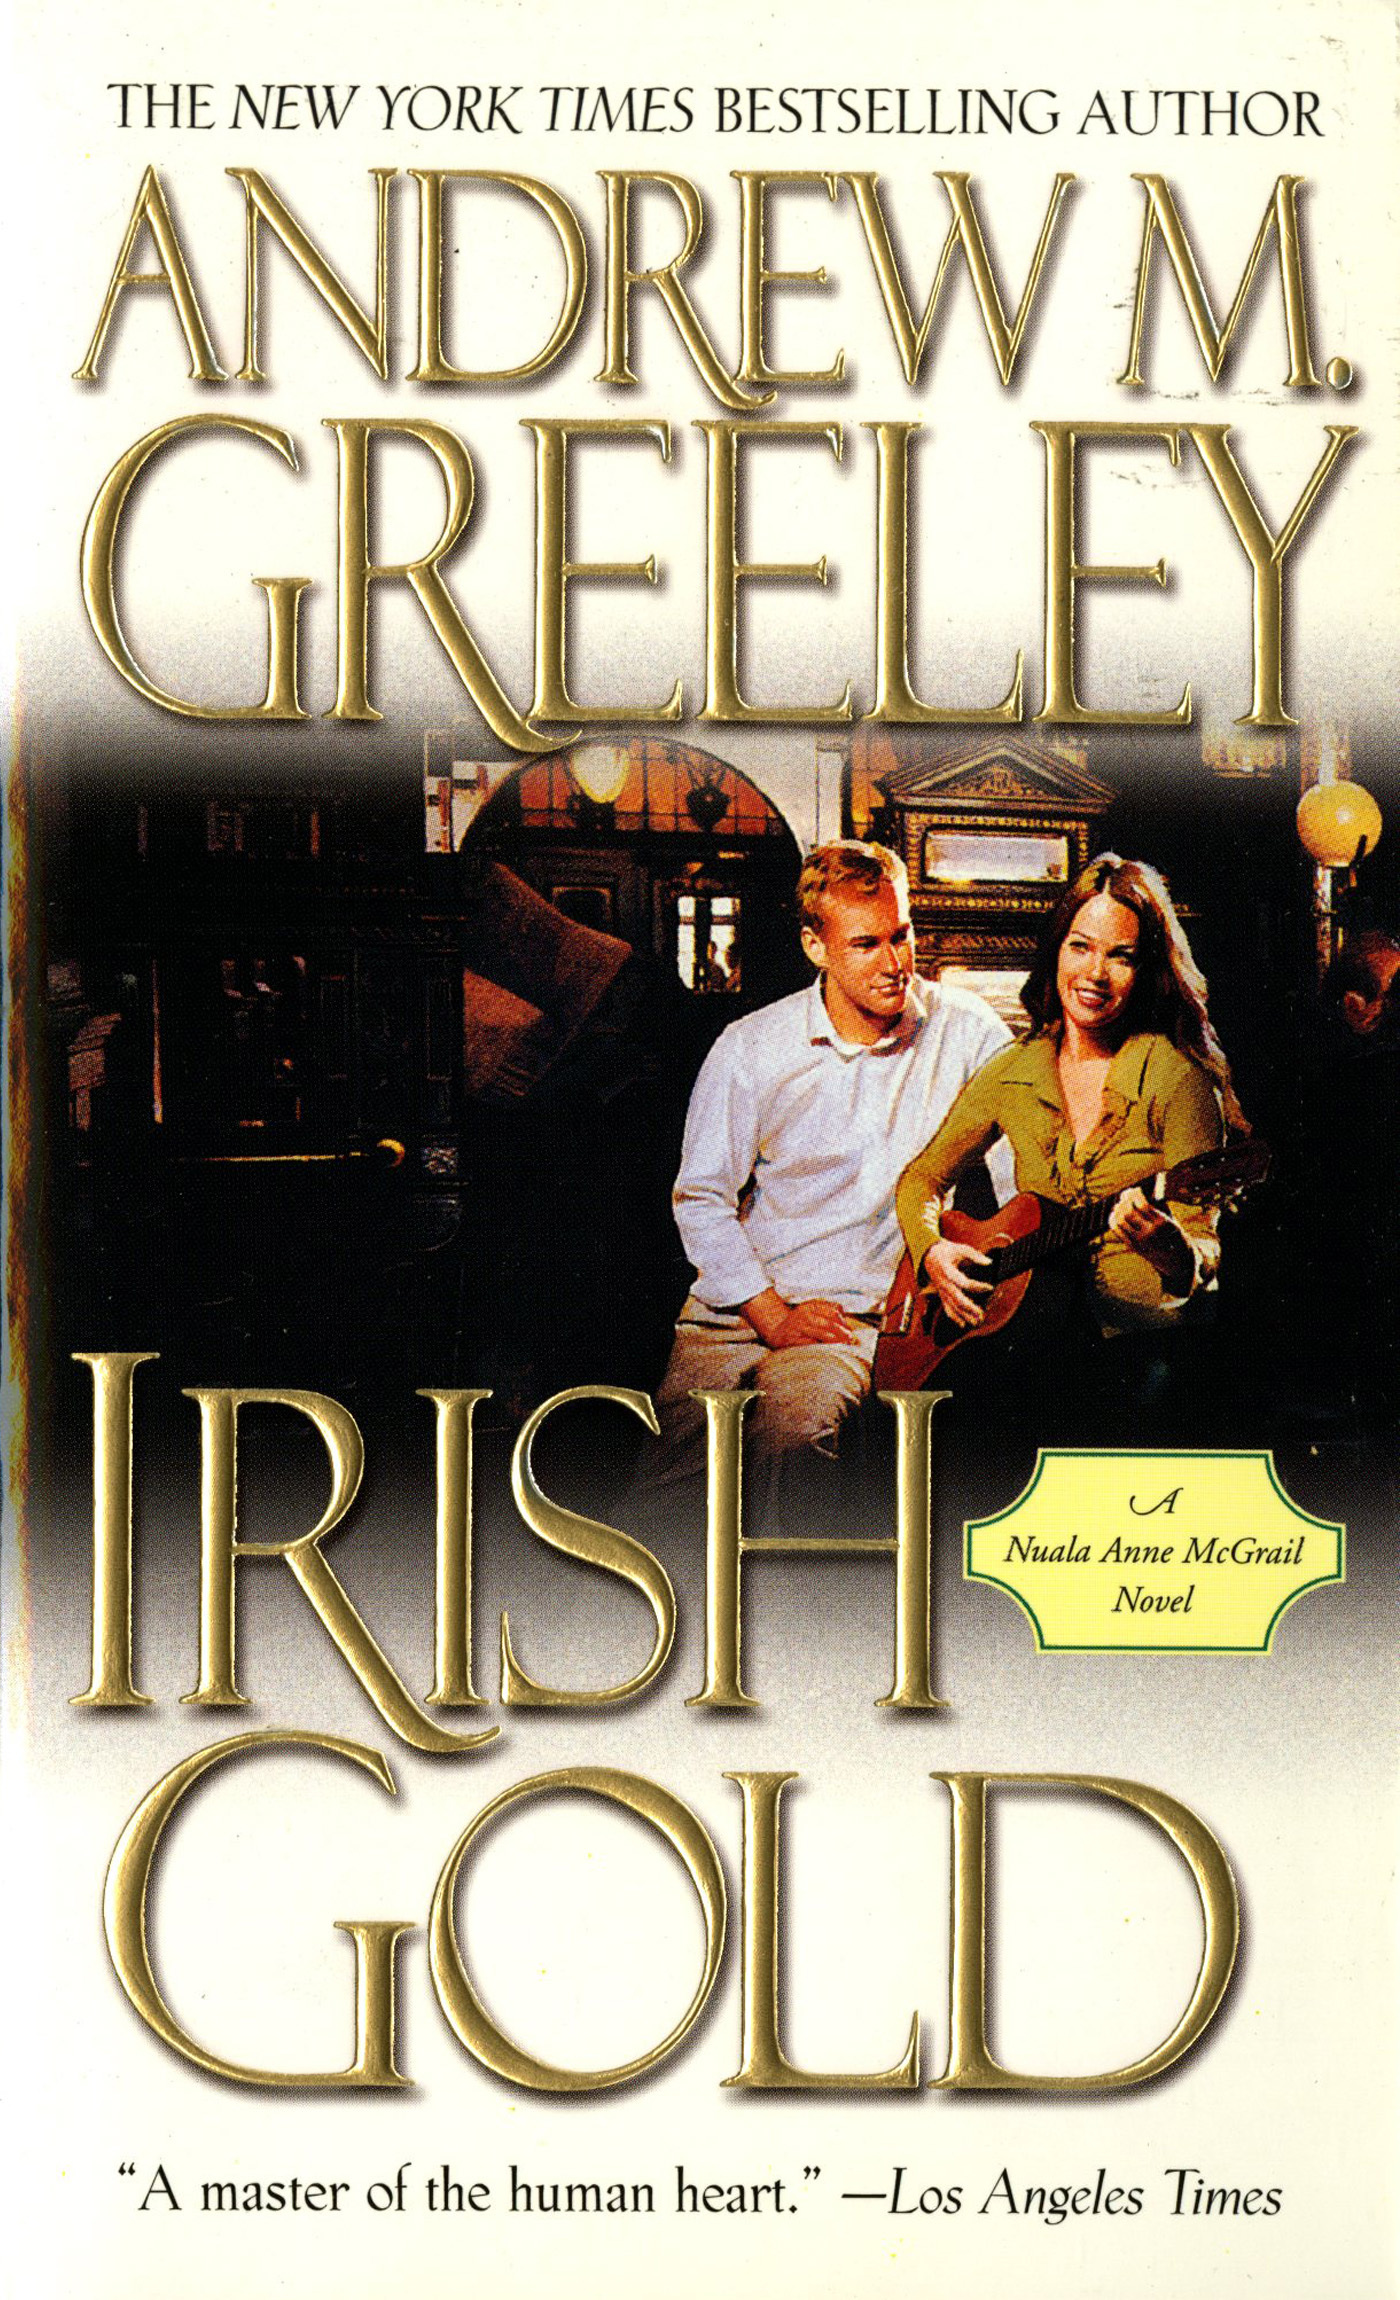 Irish Gold : A Nuala Anne McGrail Novel by Andrew M. Greeley